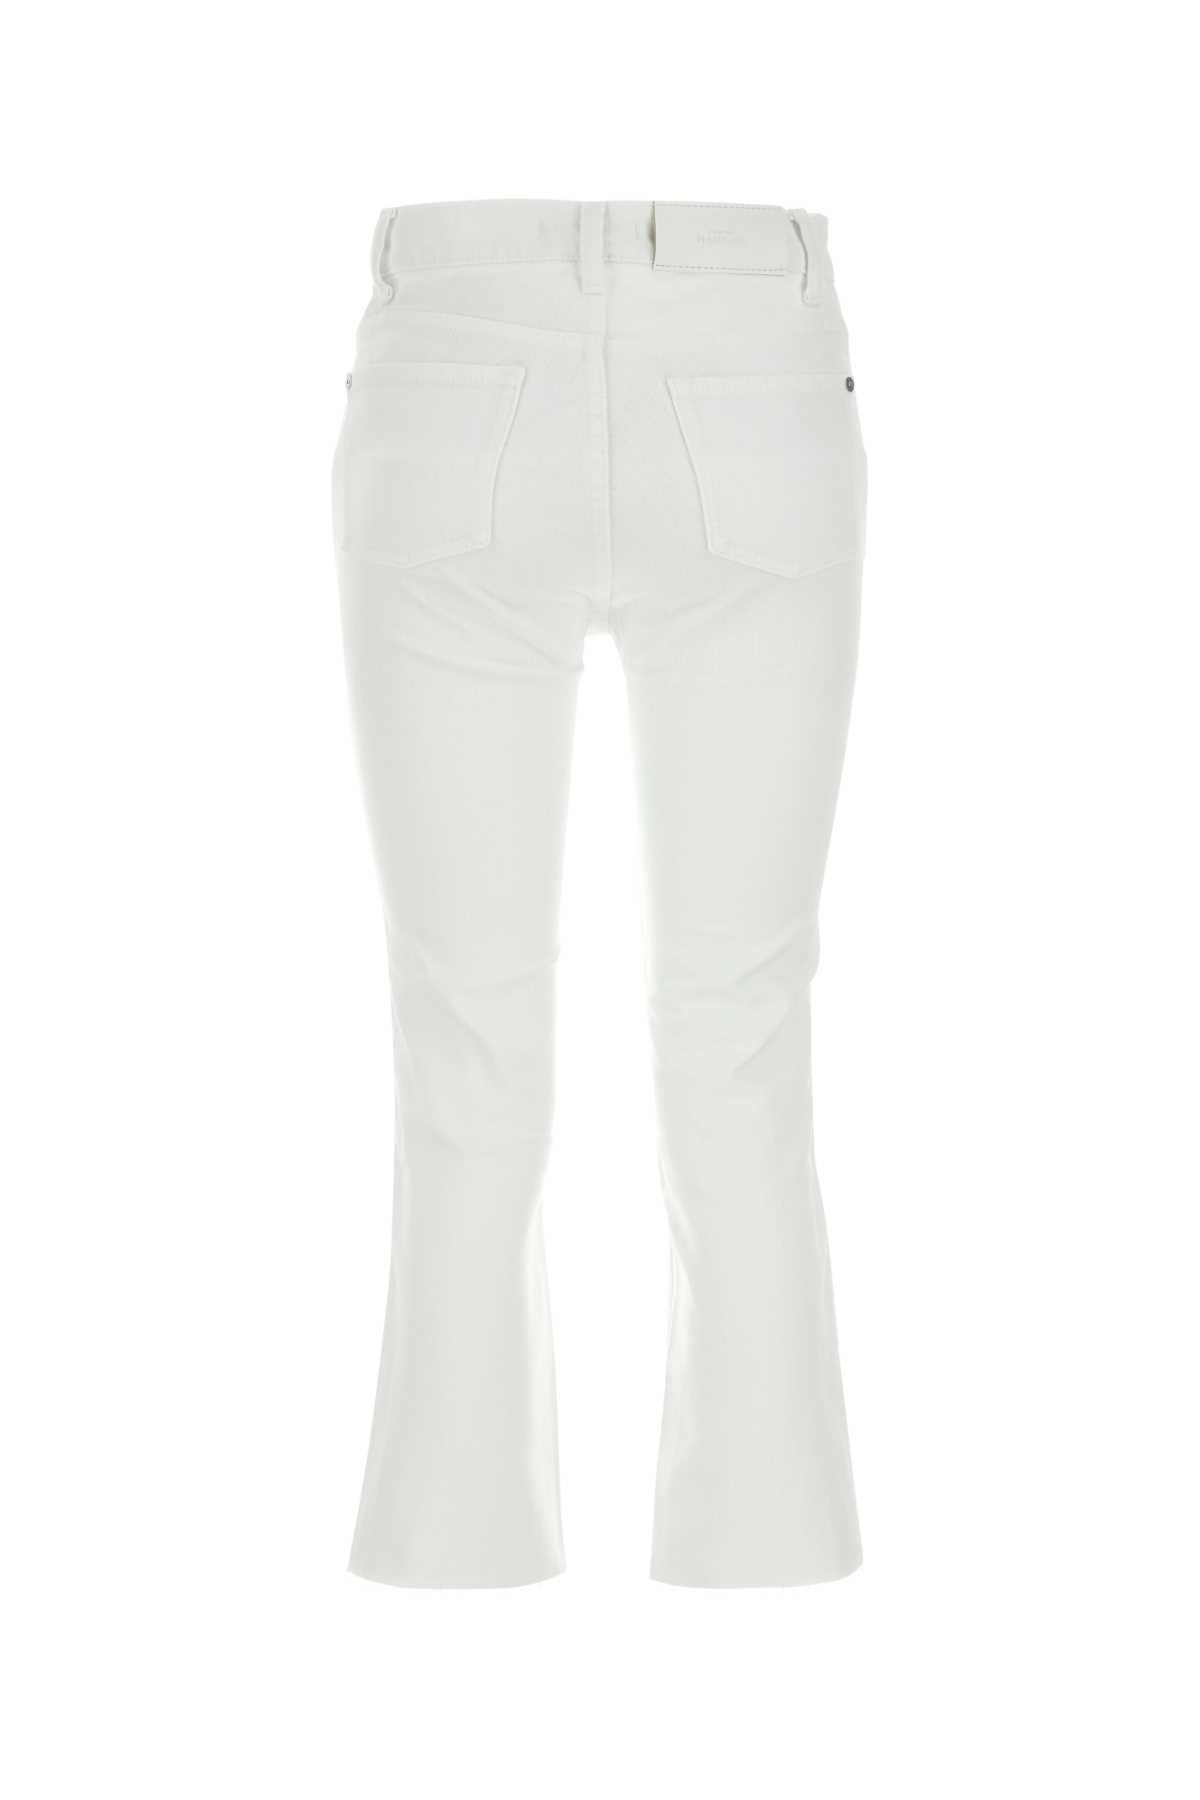 7 For All Mankind White Stretch Denim Logan Stovepipe Jeans In Yacht